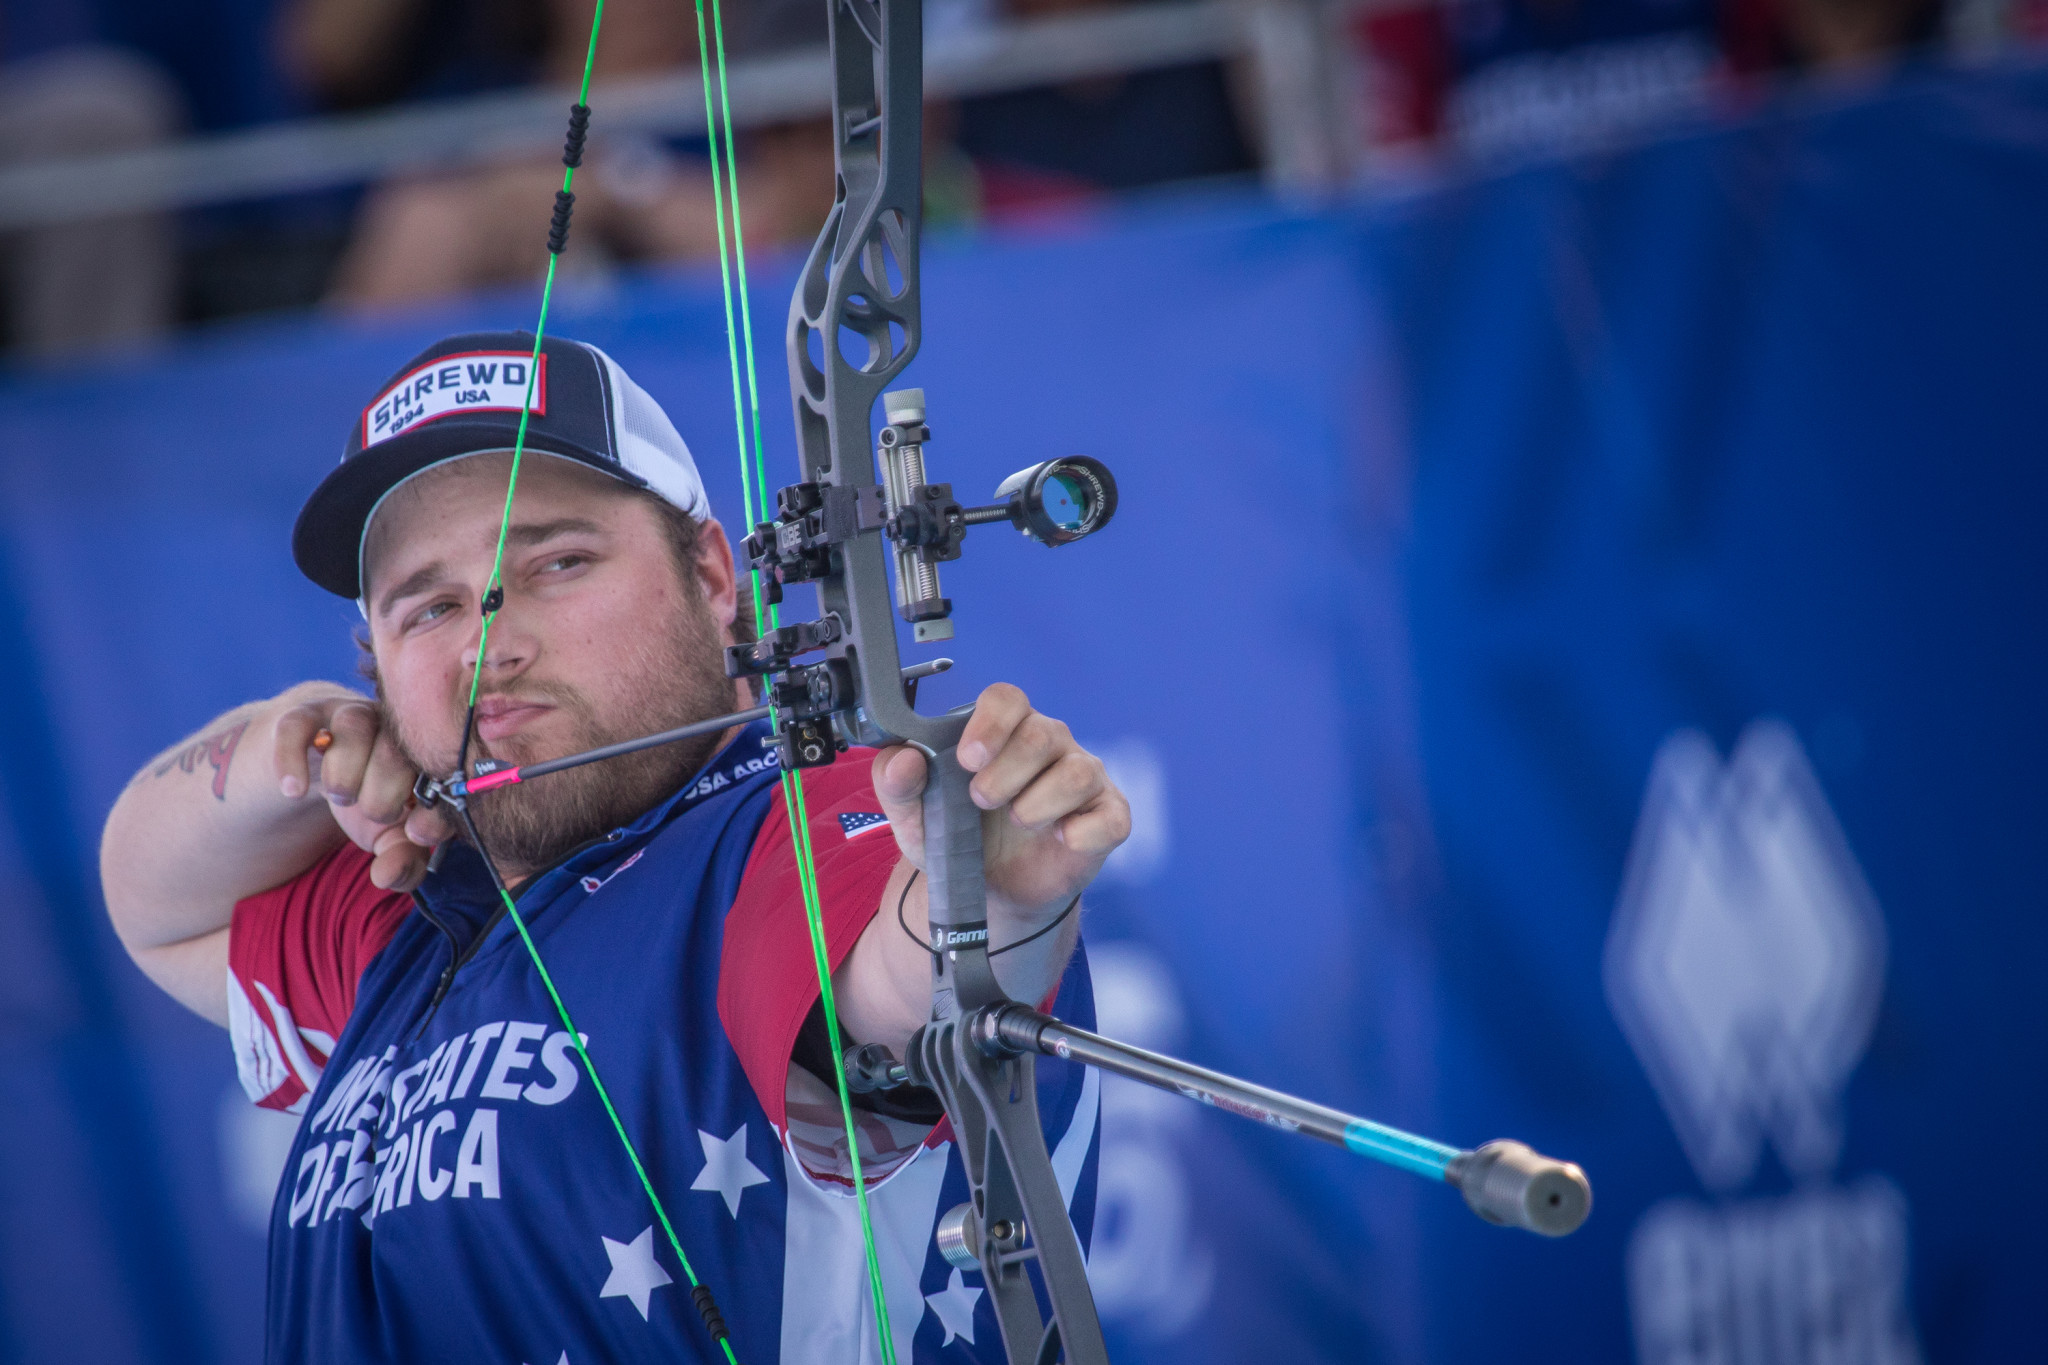 The United States' Kris Schaff was one of the stand-out performers in men's compound qualification ©Getty Images